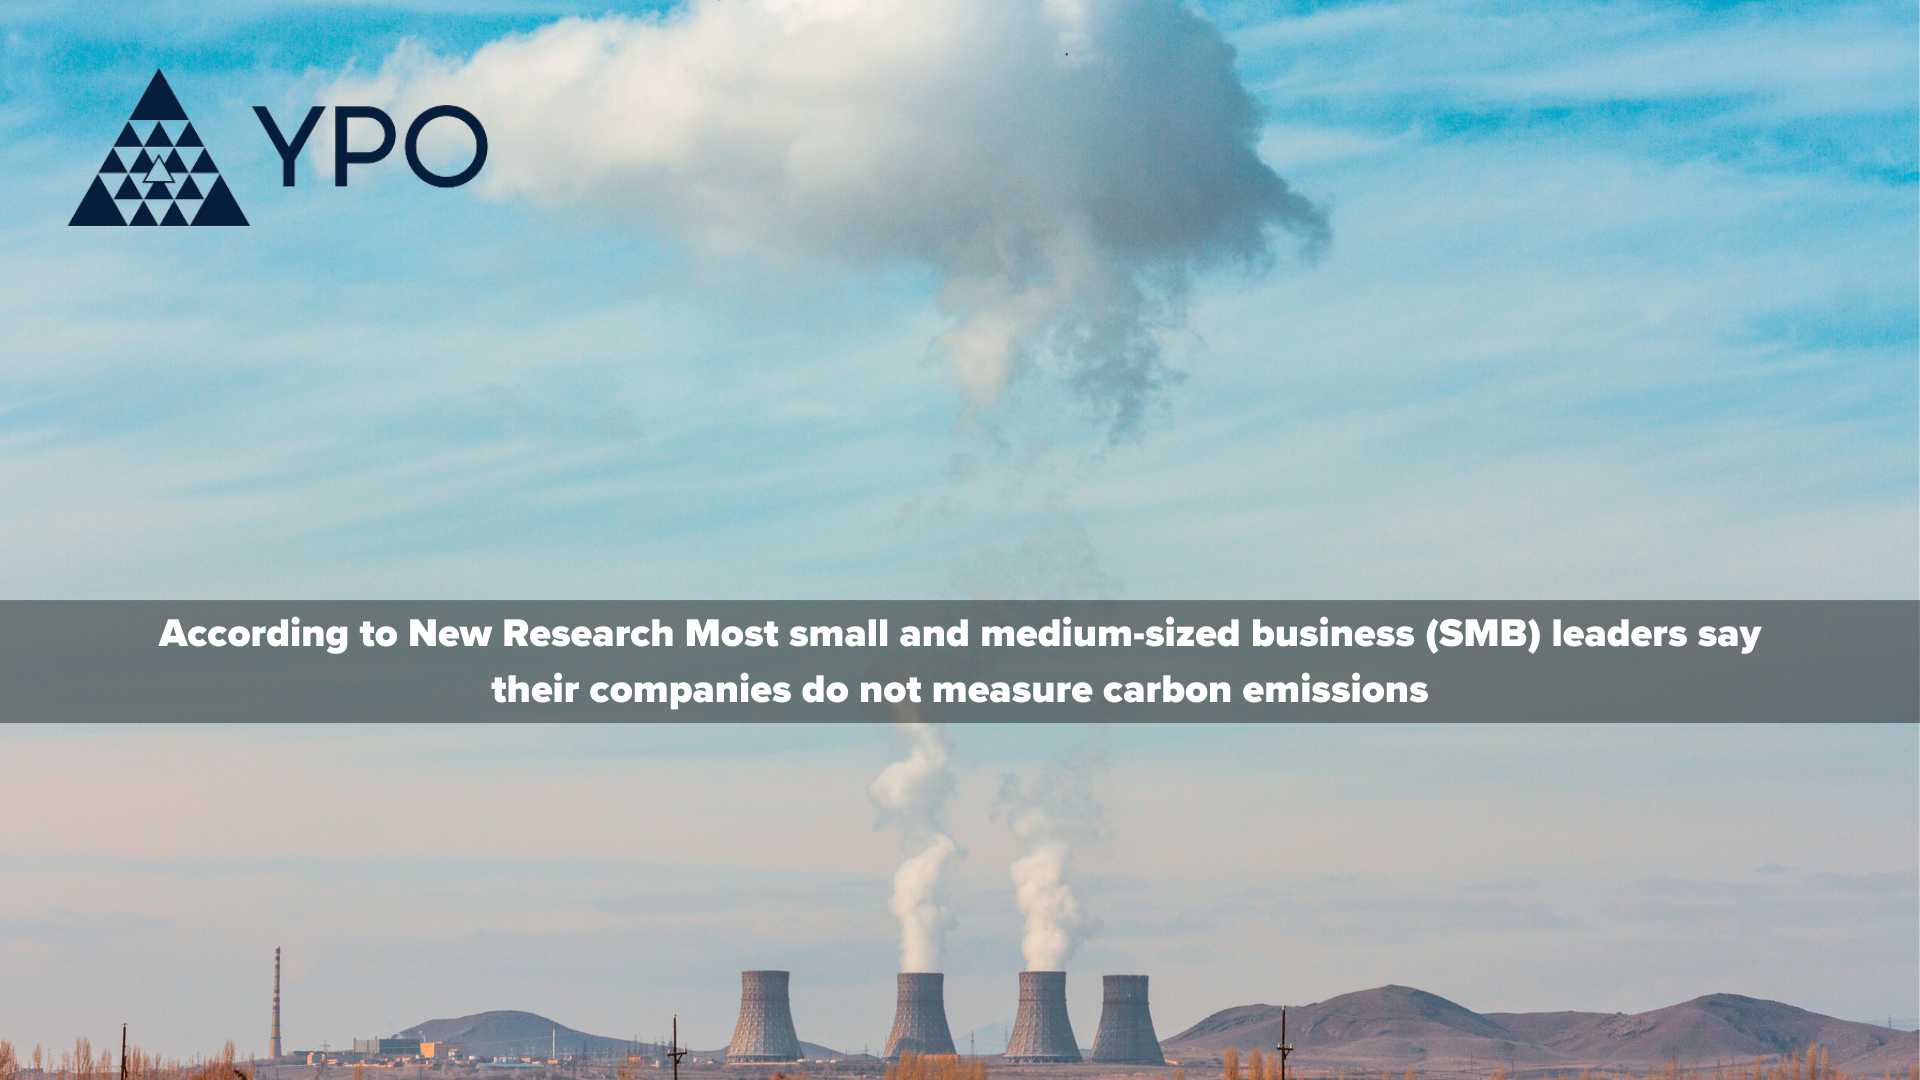 YPO: Only One in 25 Small and Medium-sized Business Leaders Say They Measure Company Carbon Emissions